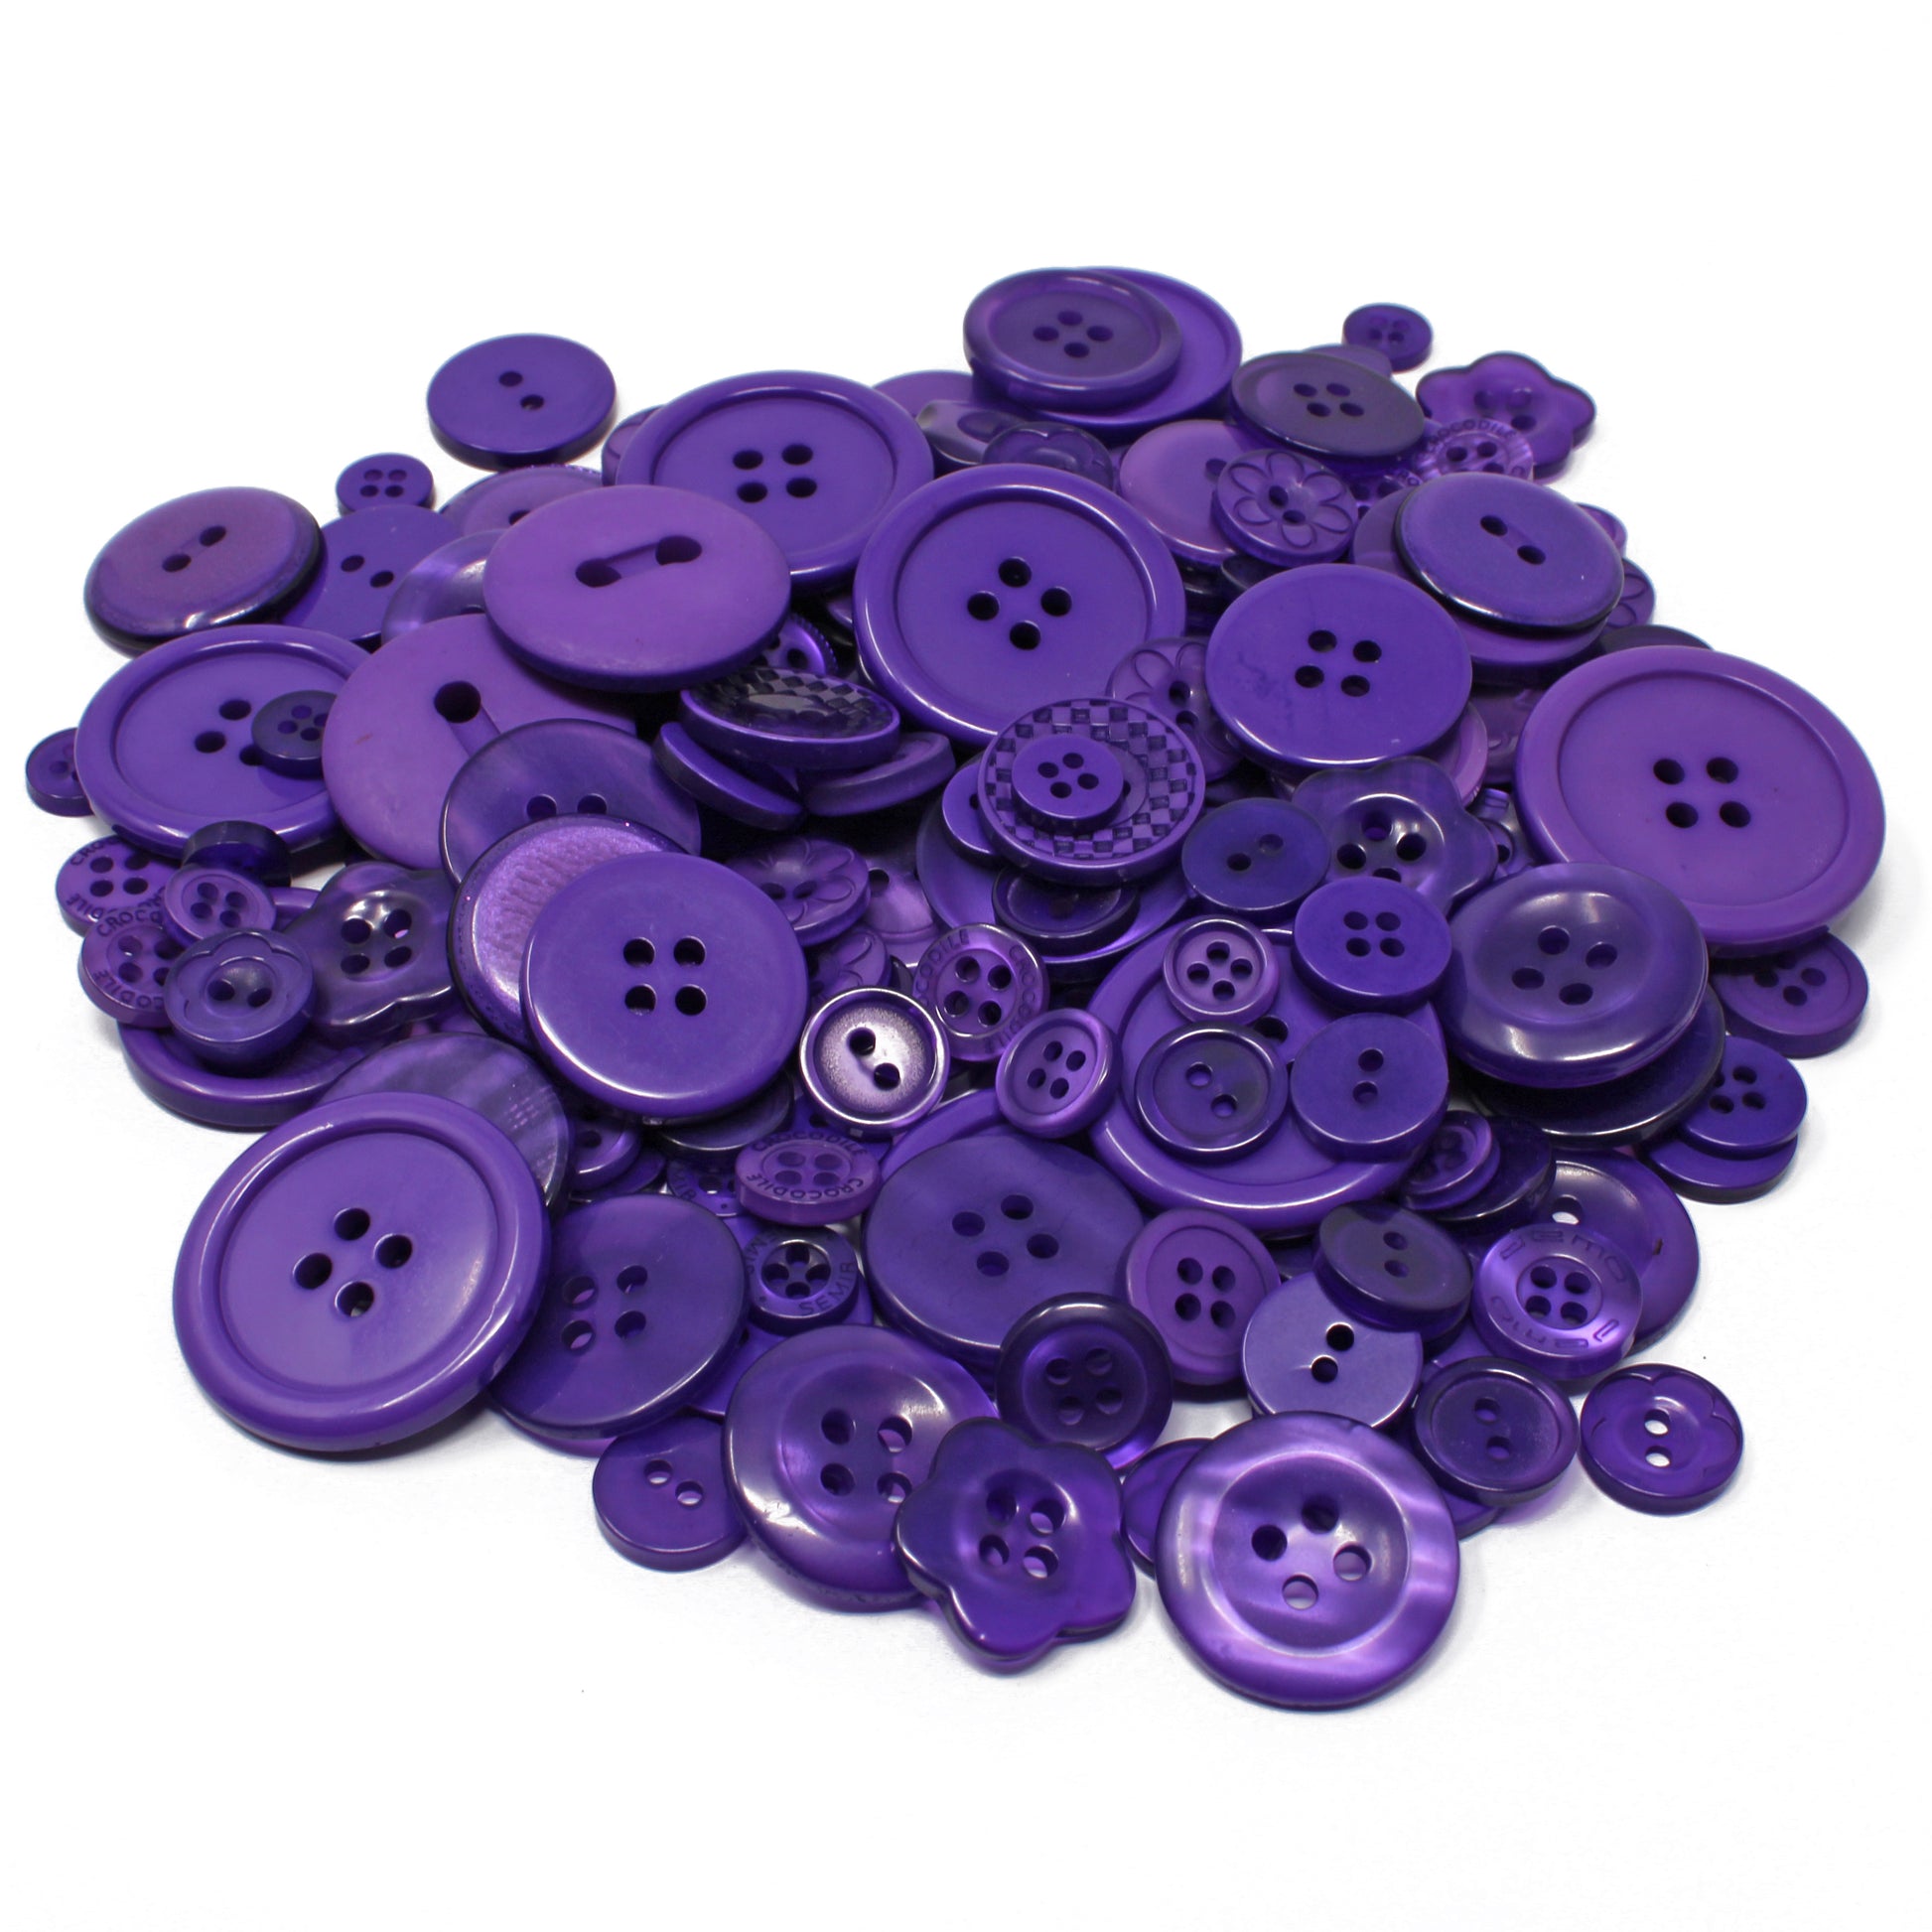 Purple 100g Bags Of Mix Acrylic & Resin Buttons